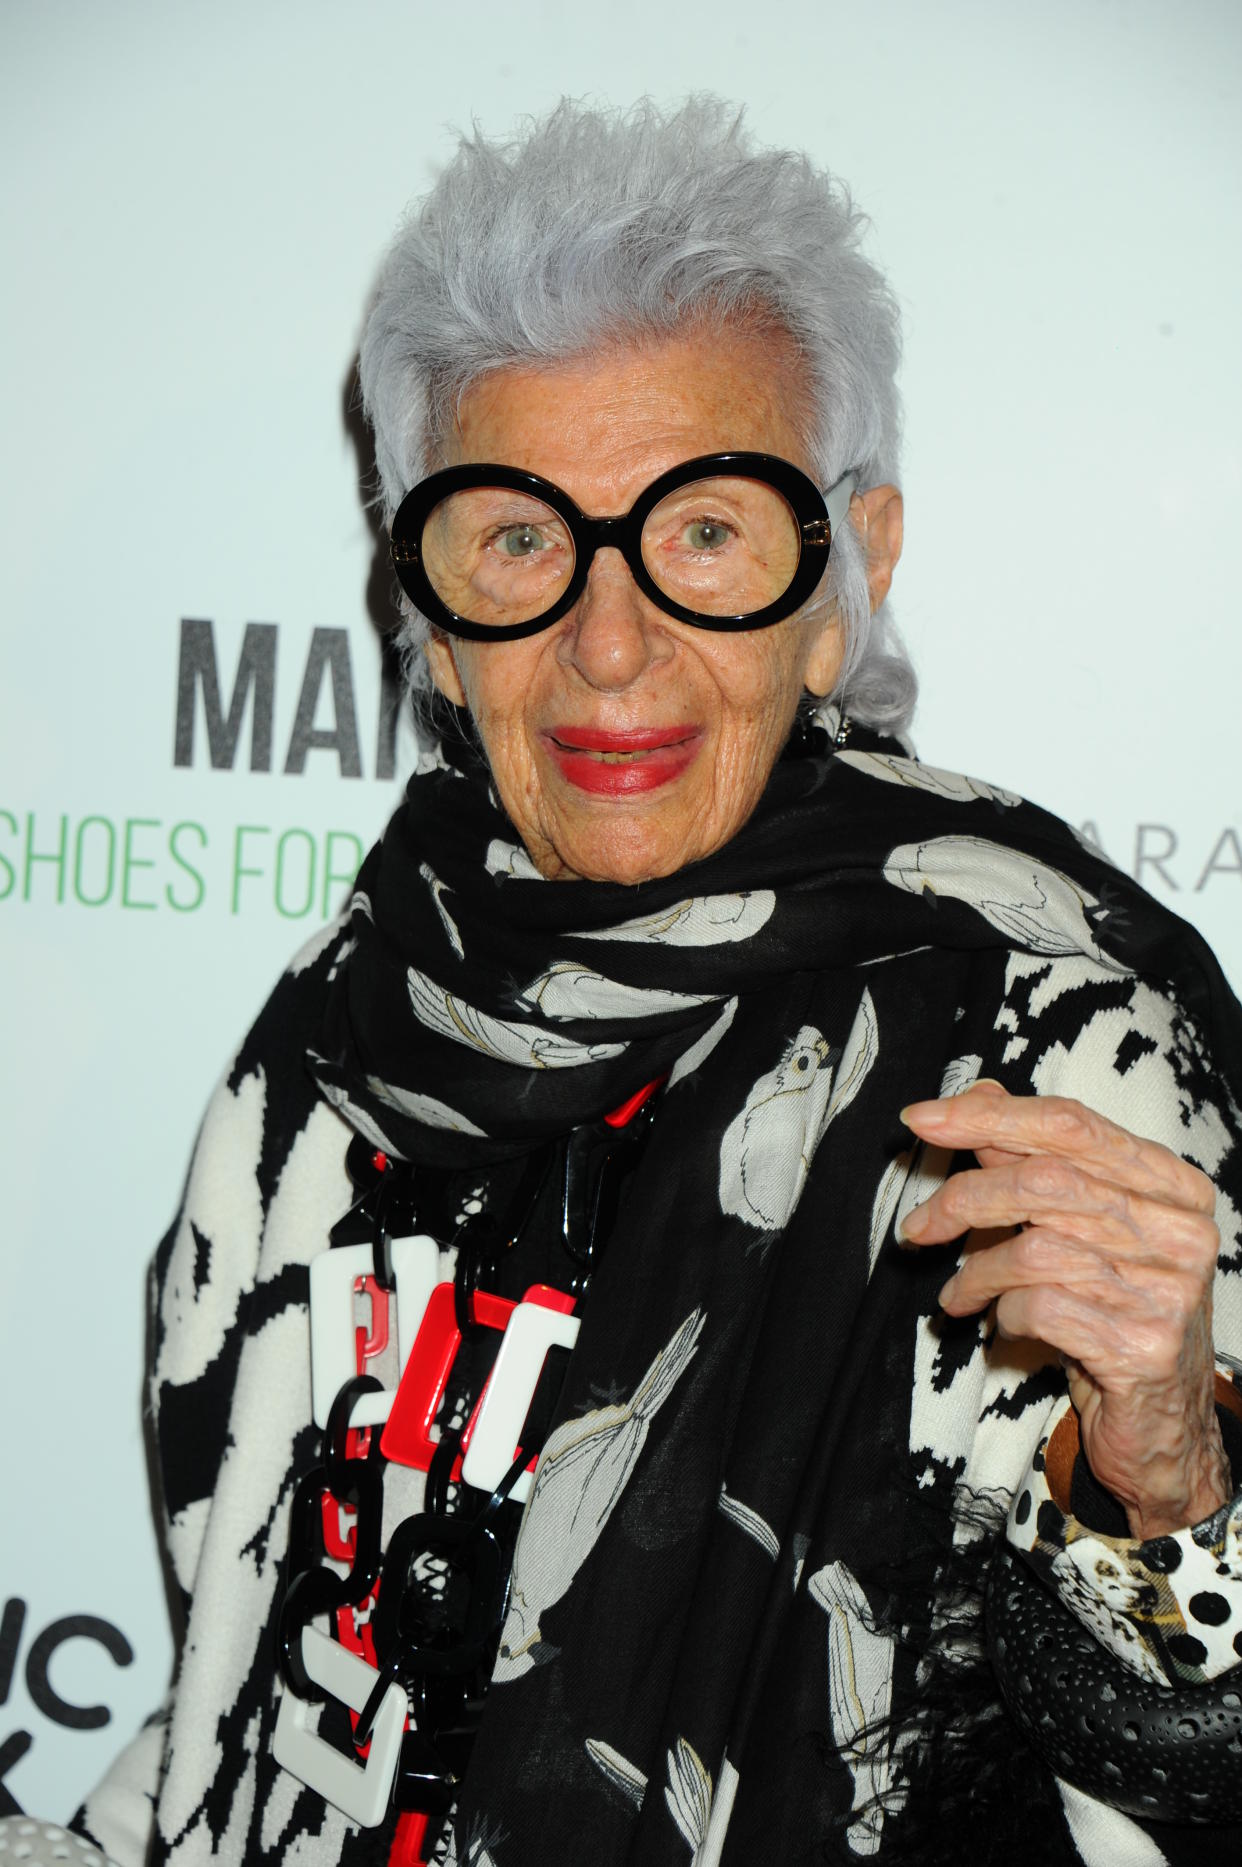 Iris Apfel attends the Manolo: The Boy Who Made Shoes for Lizards New York Premiere, held at The Frick Collection in New York, NY on September 14, 2017. (Photo by Elise Leclerc)